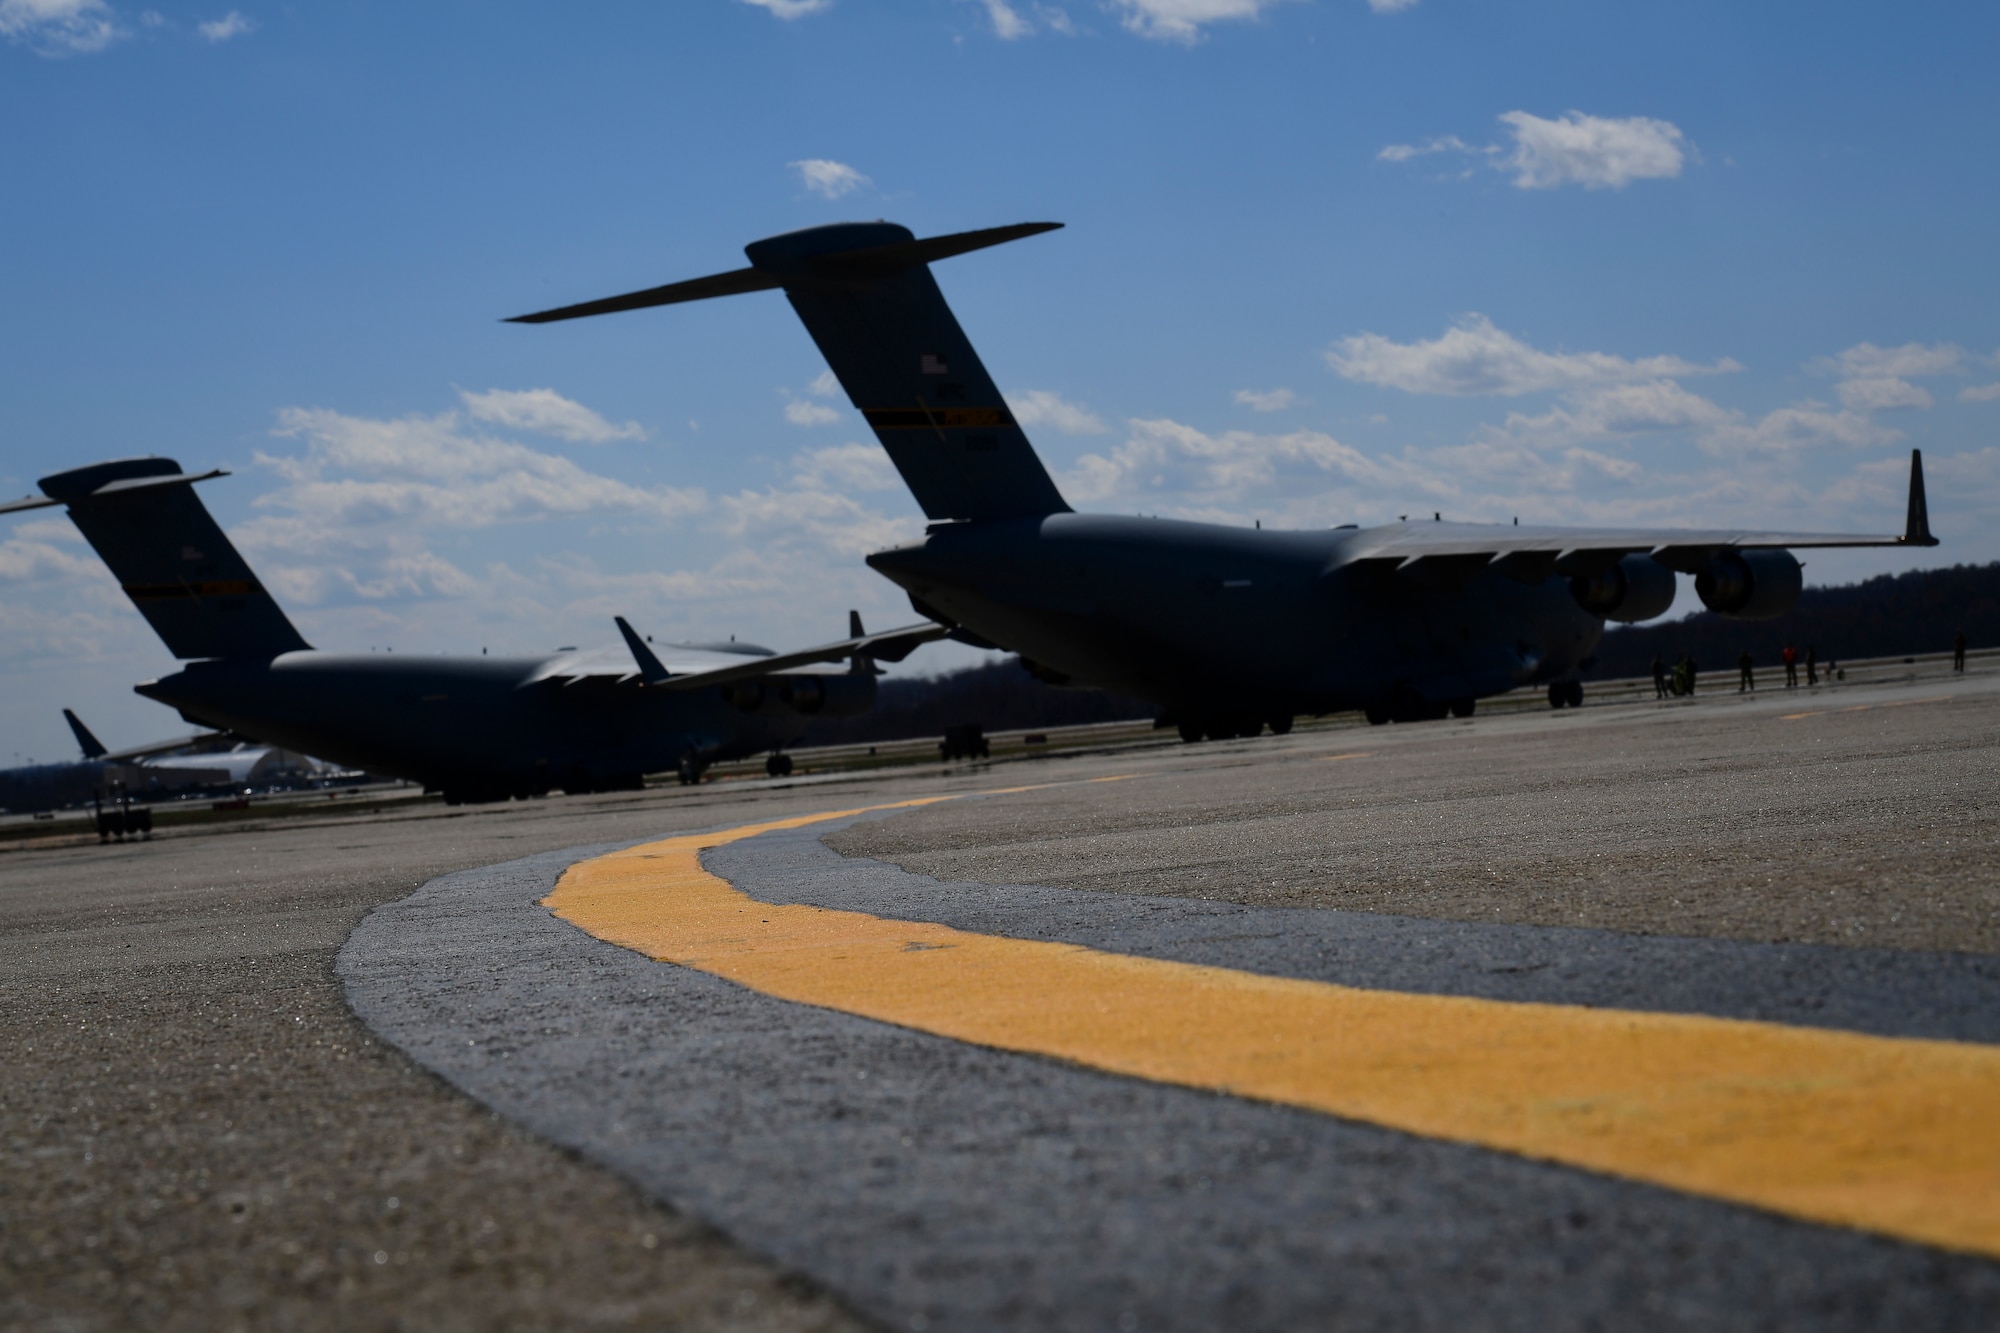 Airmen assigned to the 911th Operations Group prepare to depart for an overseas mission at the Pittsburgh International Airport Air Reserve Station, Pennsylvania, April 3, 2019. This was the first overseas mission that the 911th Airlift Wing flew directly out of Pittsburgh IAP ARS following the conversion to the C-17 Globemaster III.